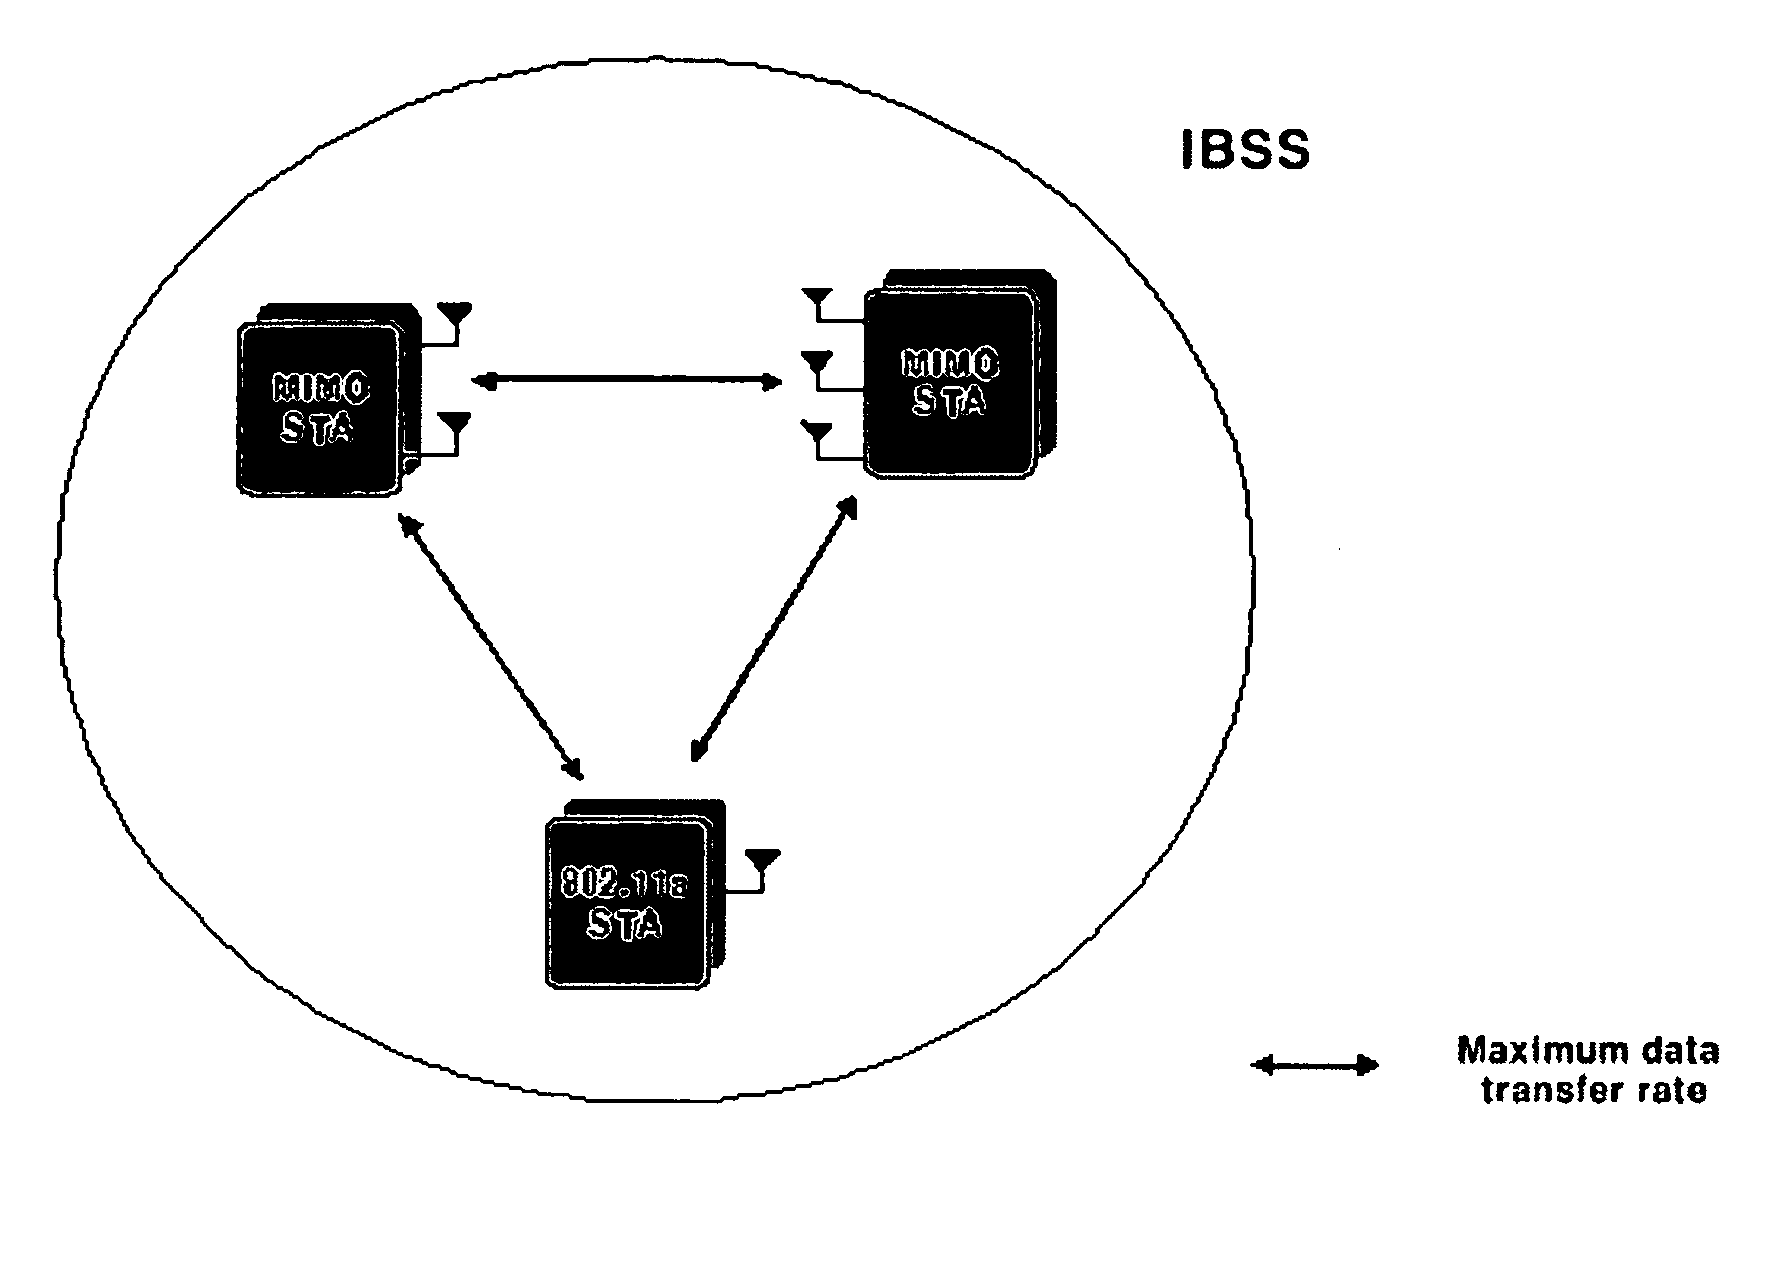 Method of performing communication over wireless network including multiple input/multiple output stations